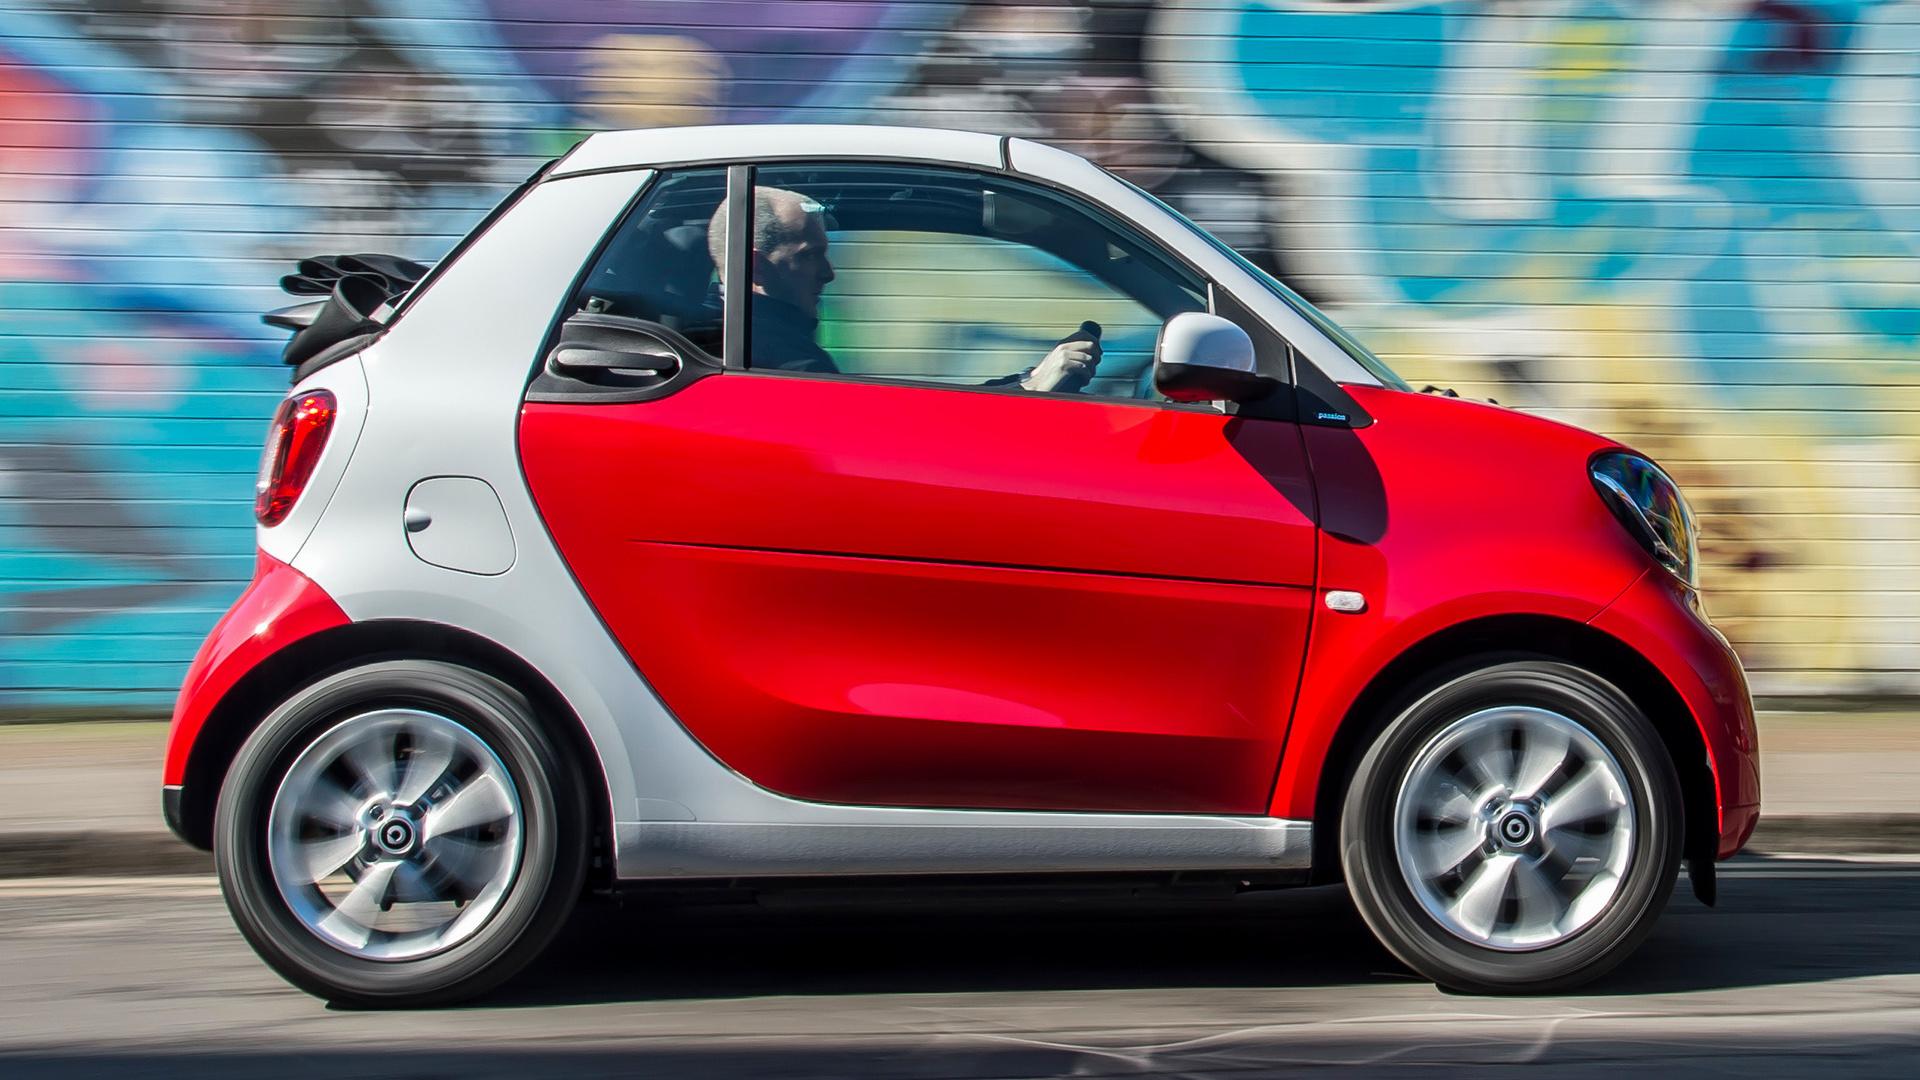 Smart Fortwo Cabrio passion (UK) and HD Image